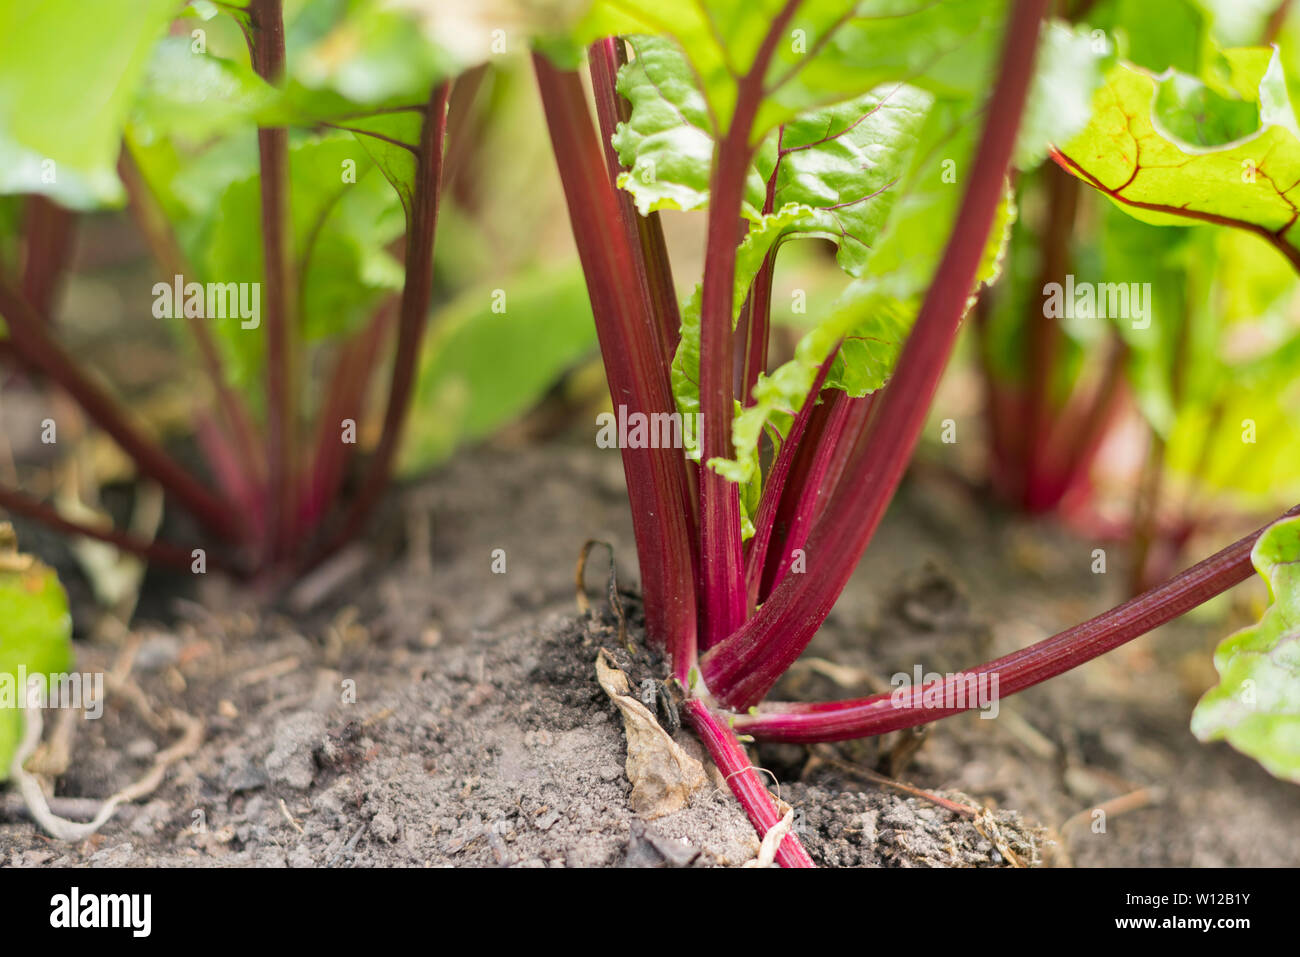 Bolthardy beetroot growing in garden in Scotland, Uk Stock Photo